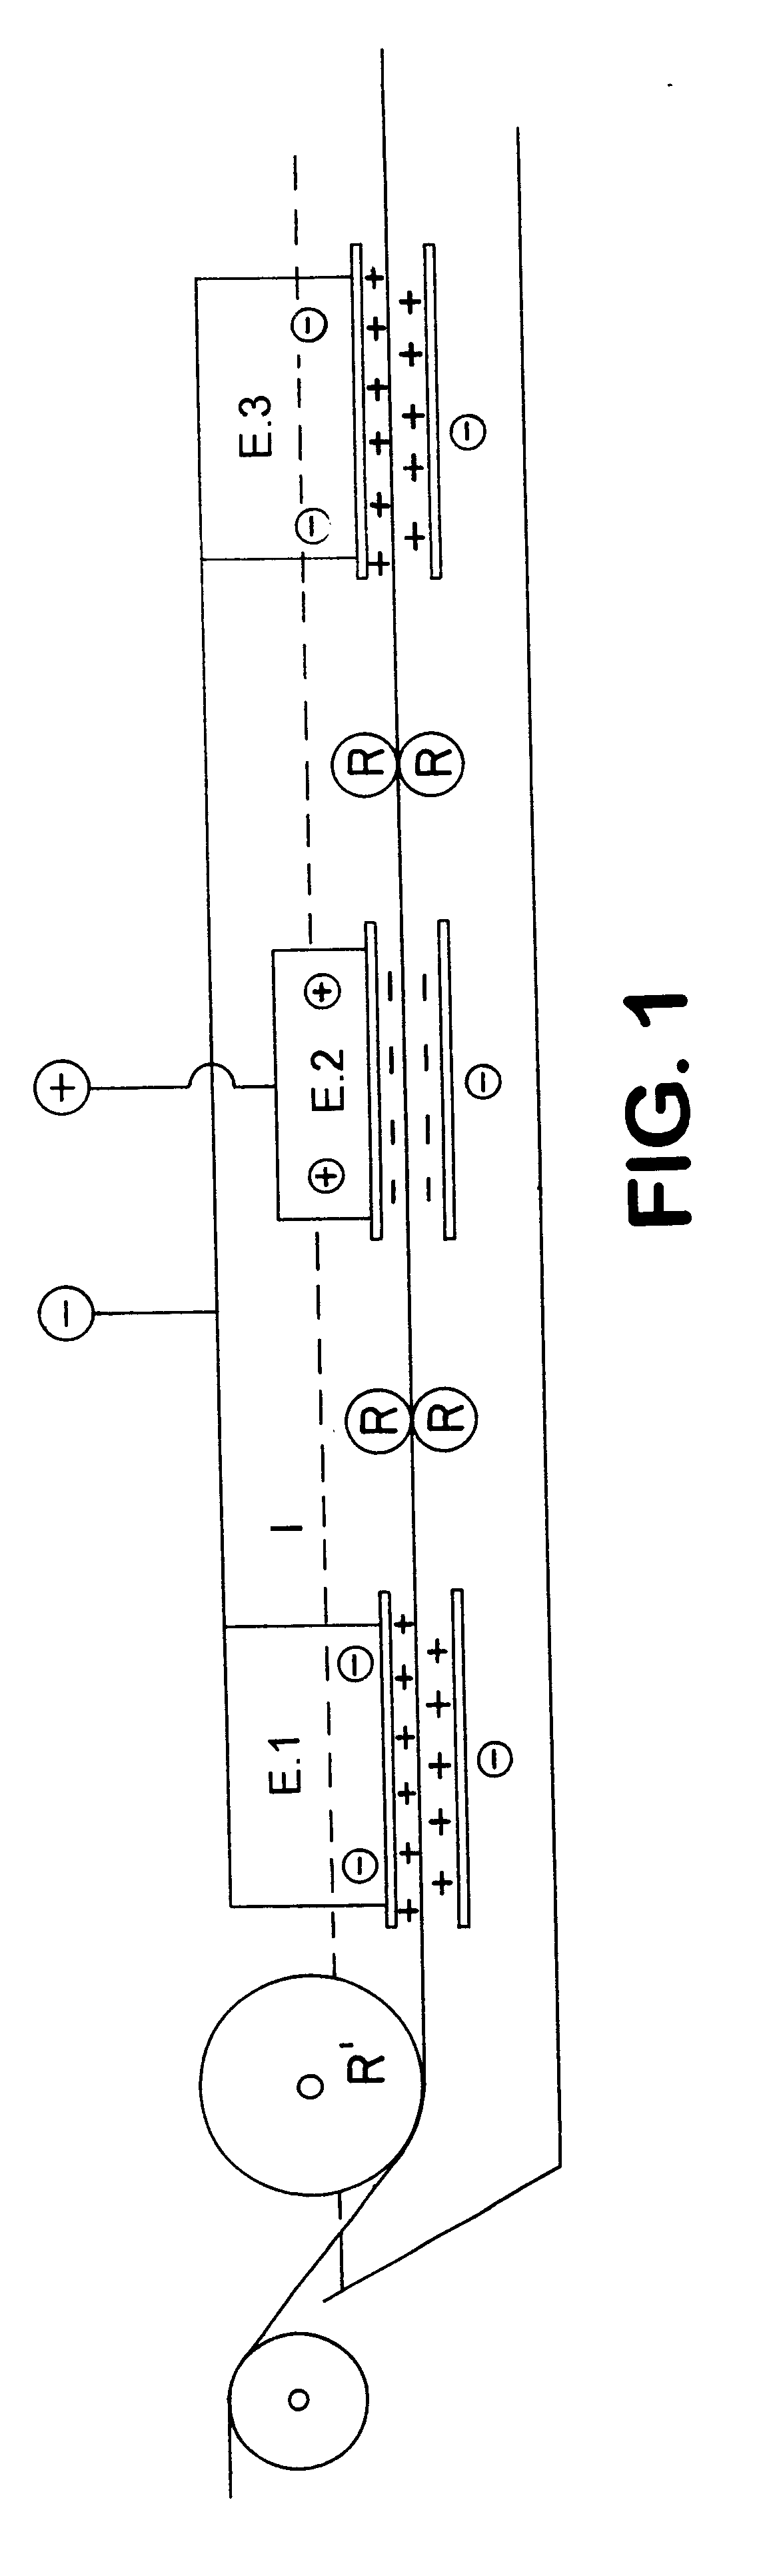 Process for electrolytic pickling using nitric acid-free solutions